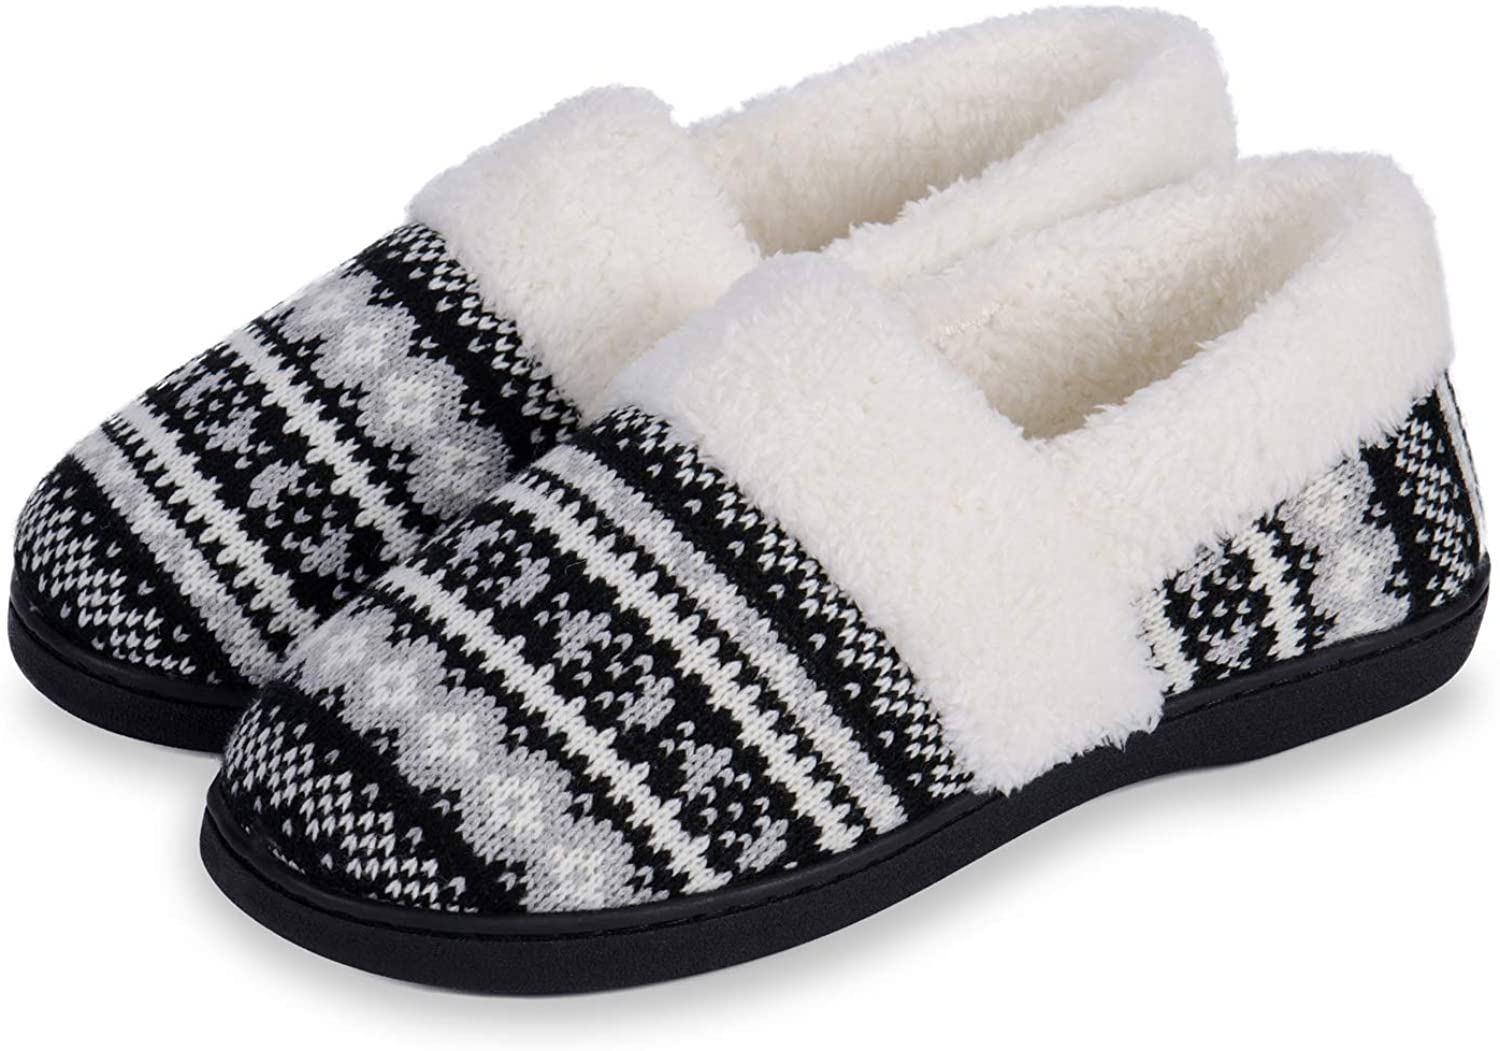 JeathFea Women's Knit Memory Foam Slippers Comfy Slip-on House Shoes with Faux Fur Lined Indoor Outdoor Anti-Skid Rubber Sole 